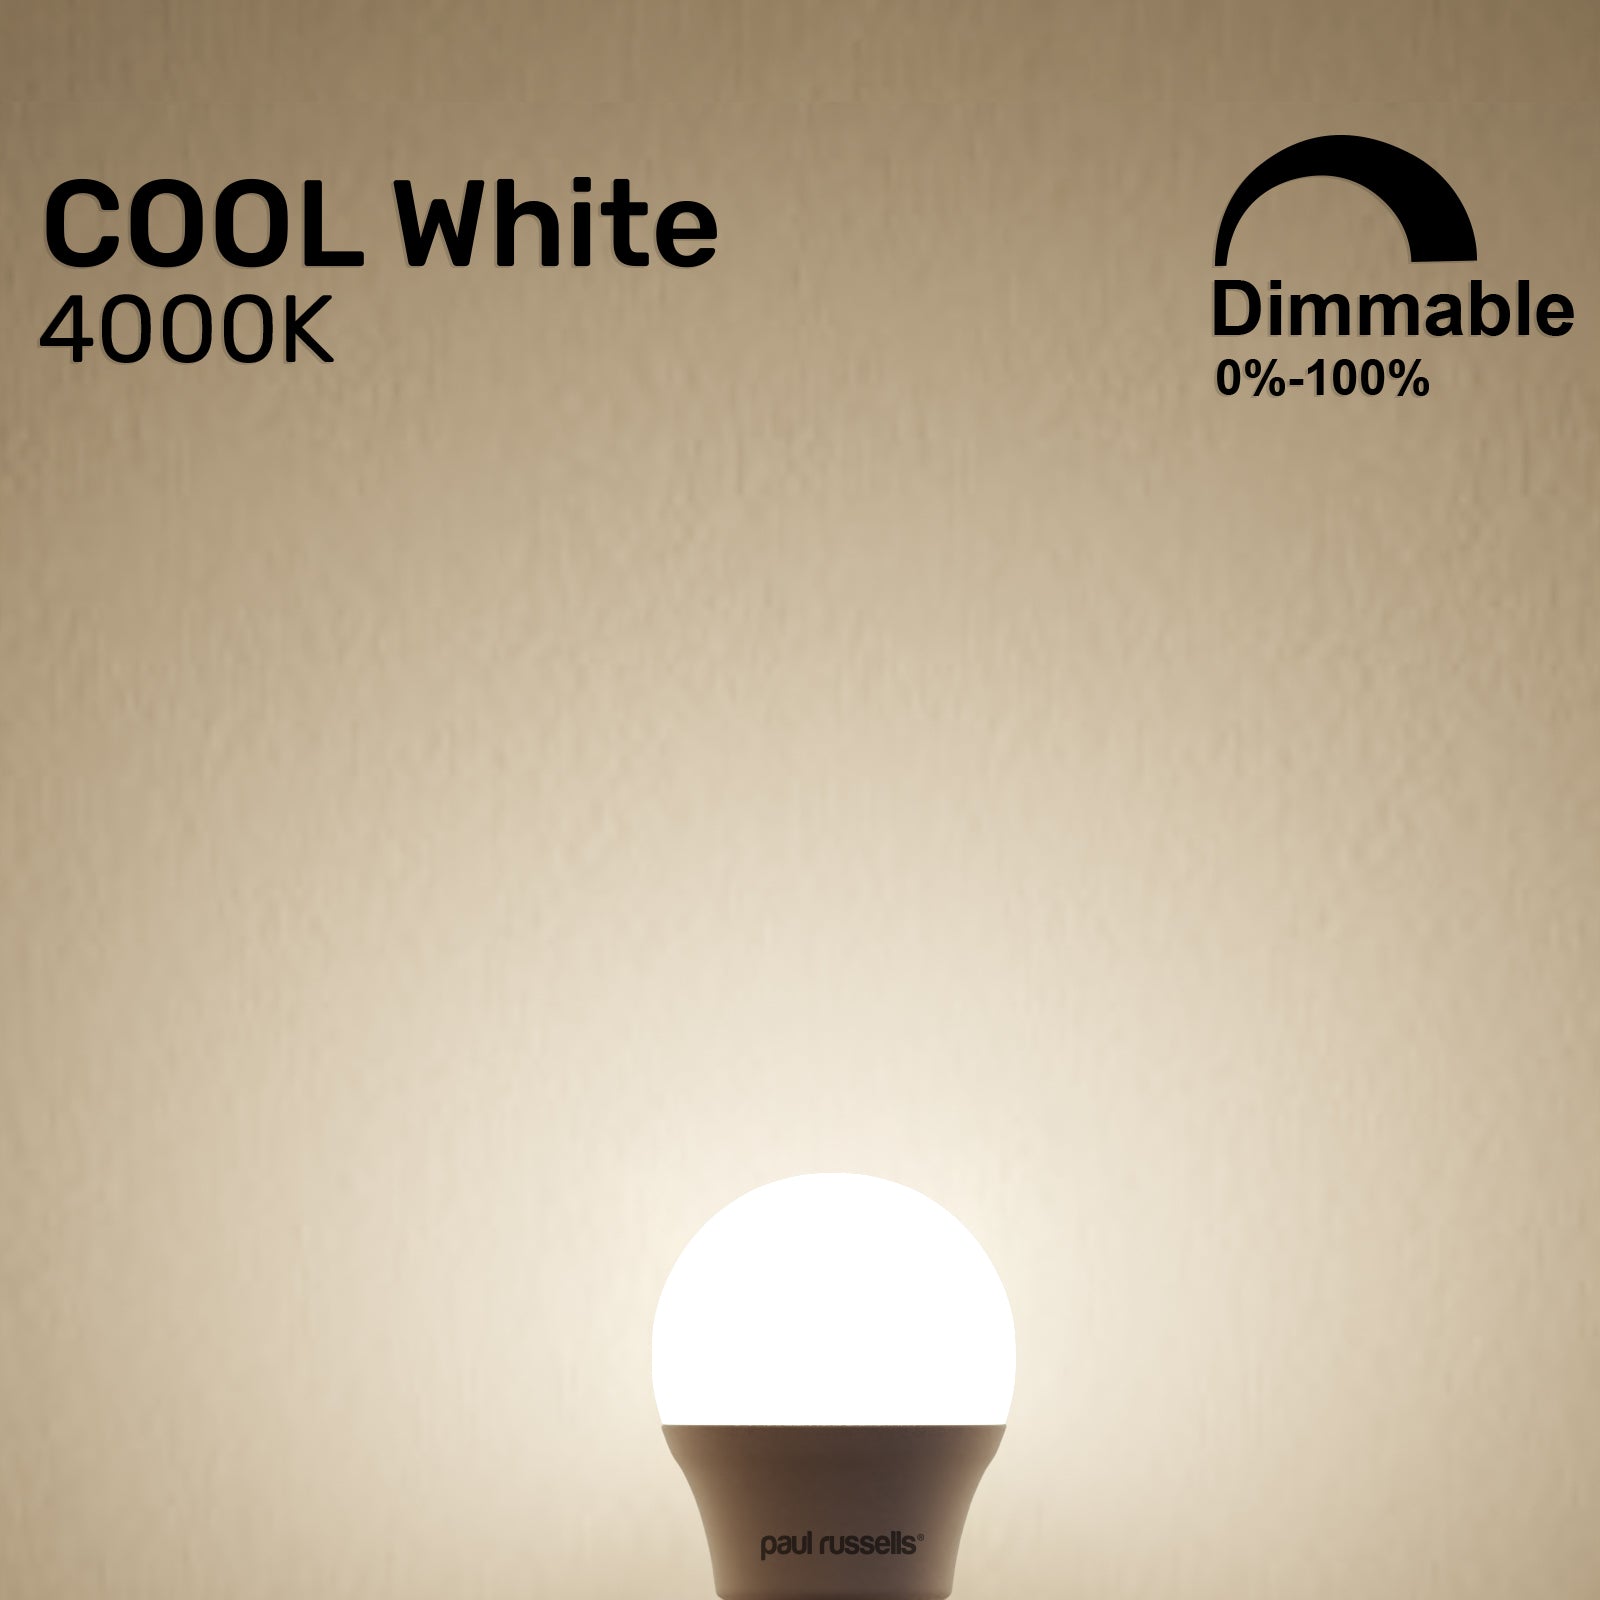 LED Dimmable Golf 5.5W (40w), BC/B22, 470 Lumens, Cool White(4000K), 240V